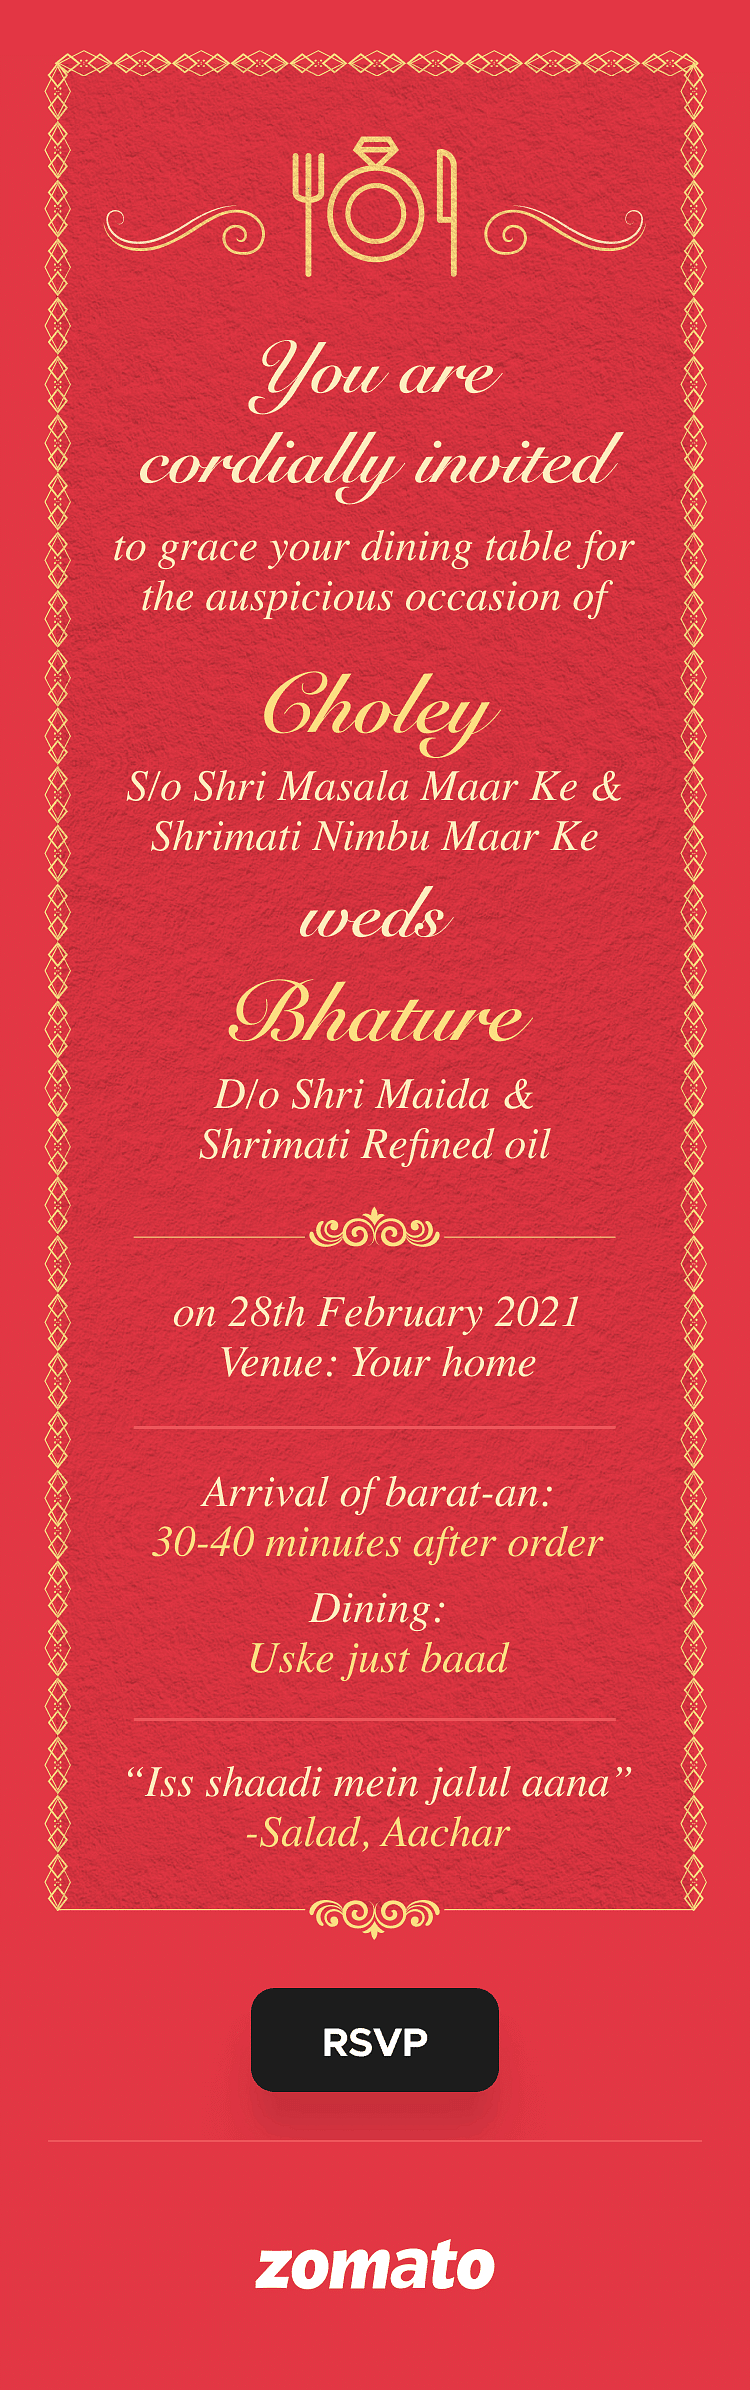 Zomato invites you to Bhature and Chole's wedding...